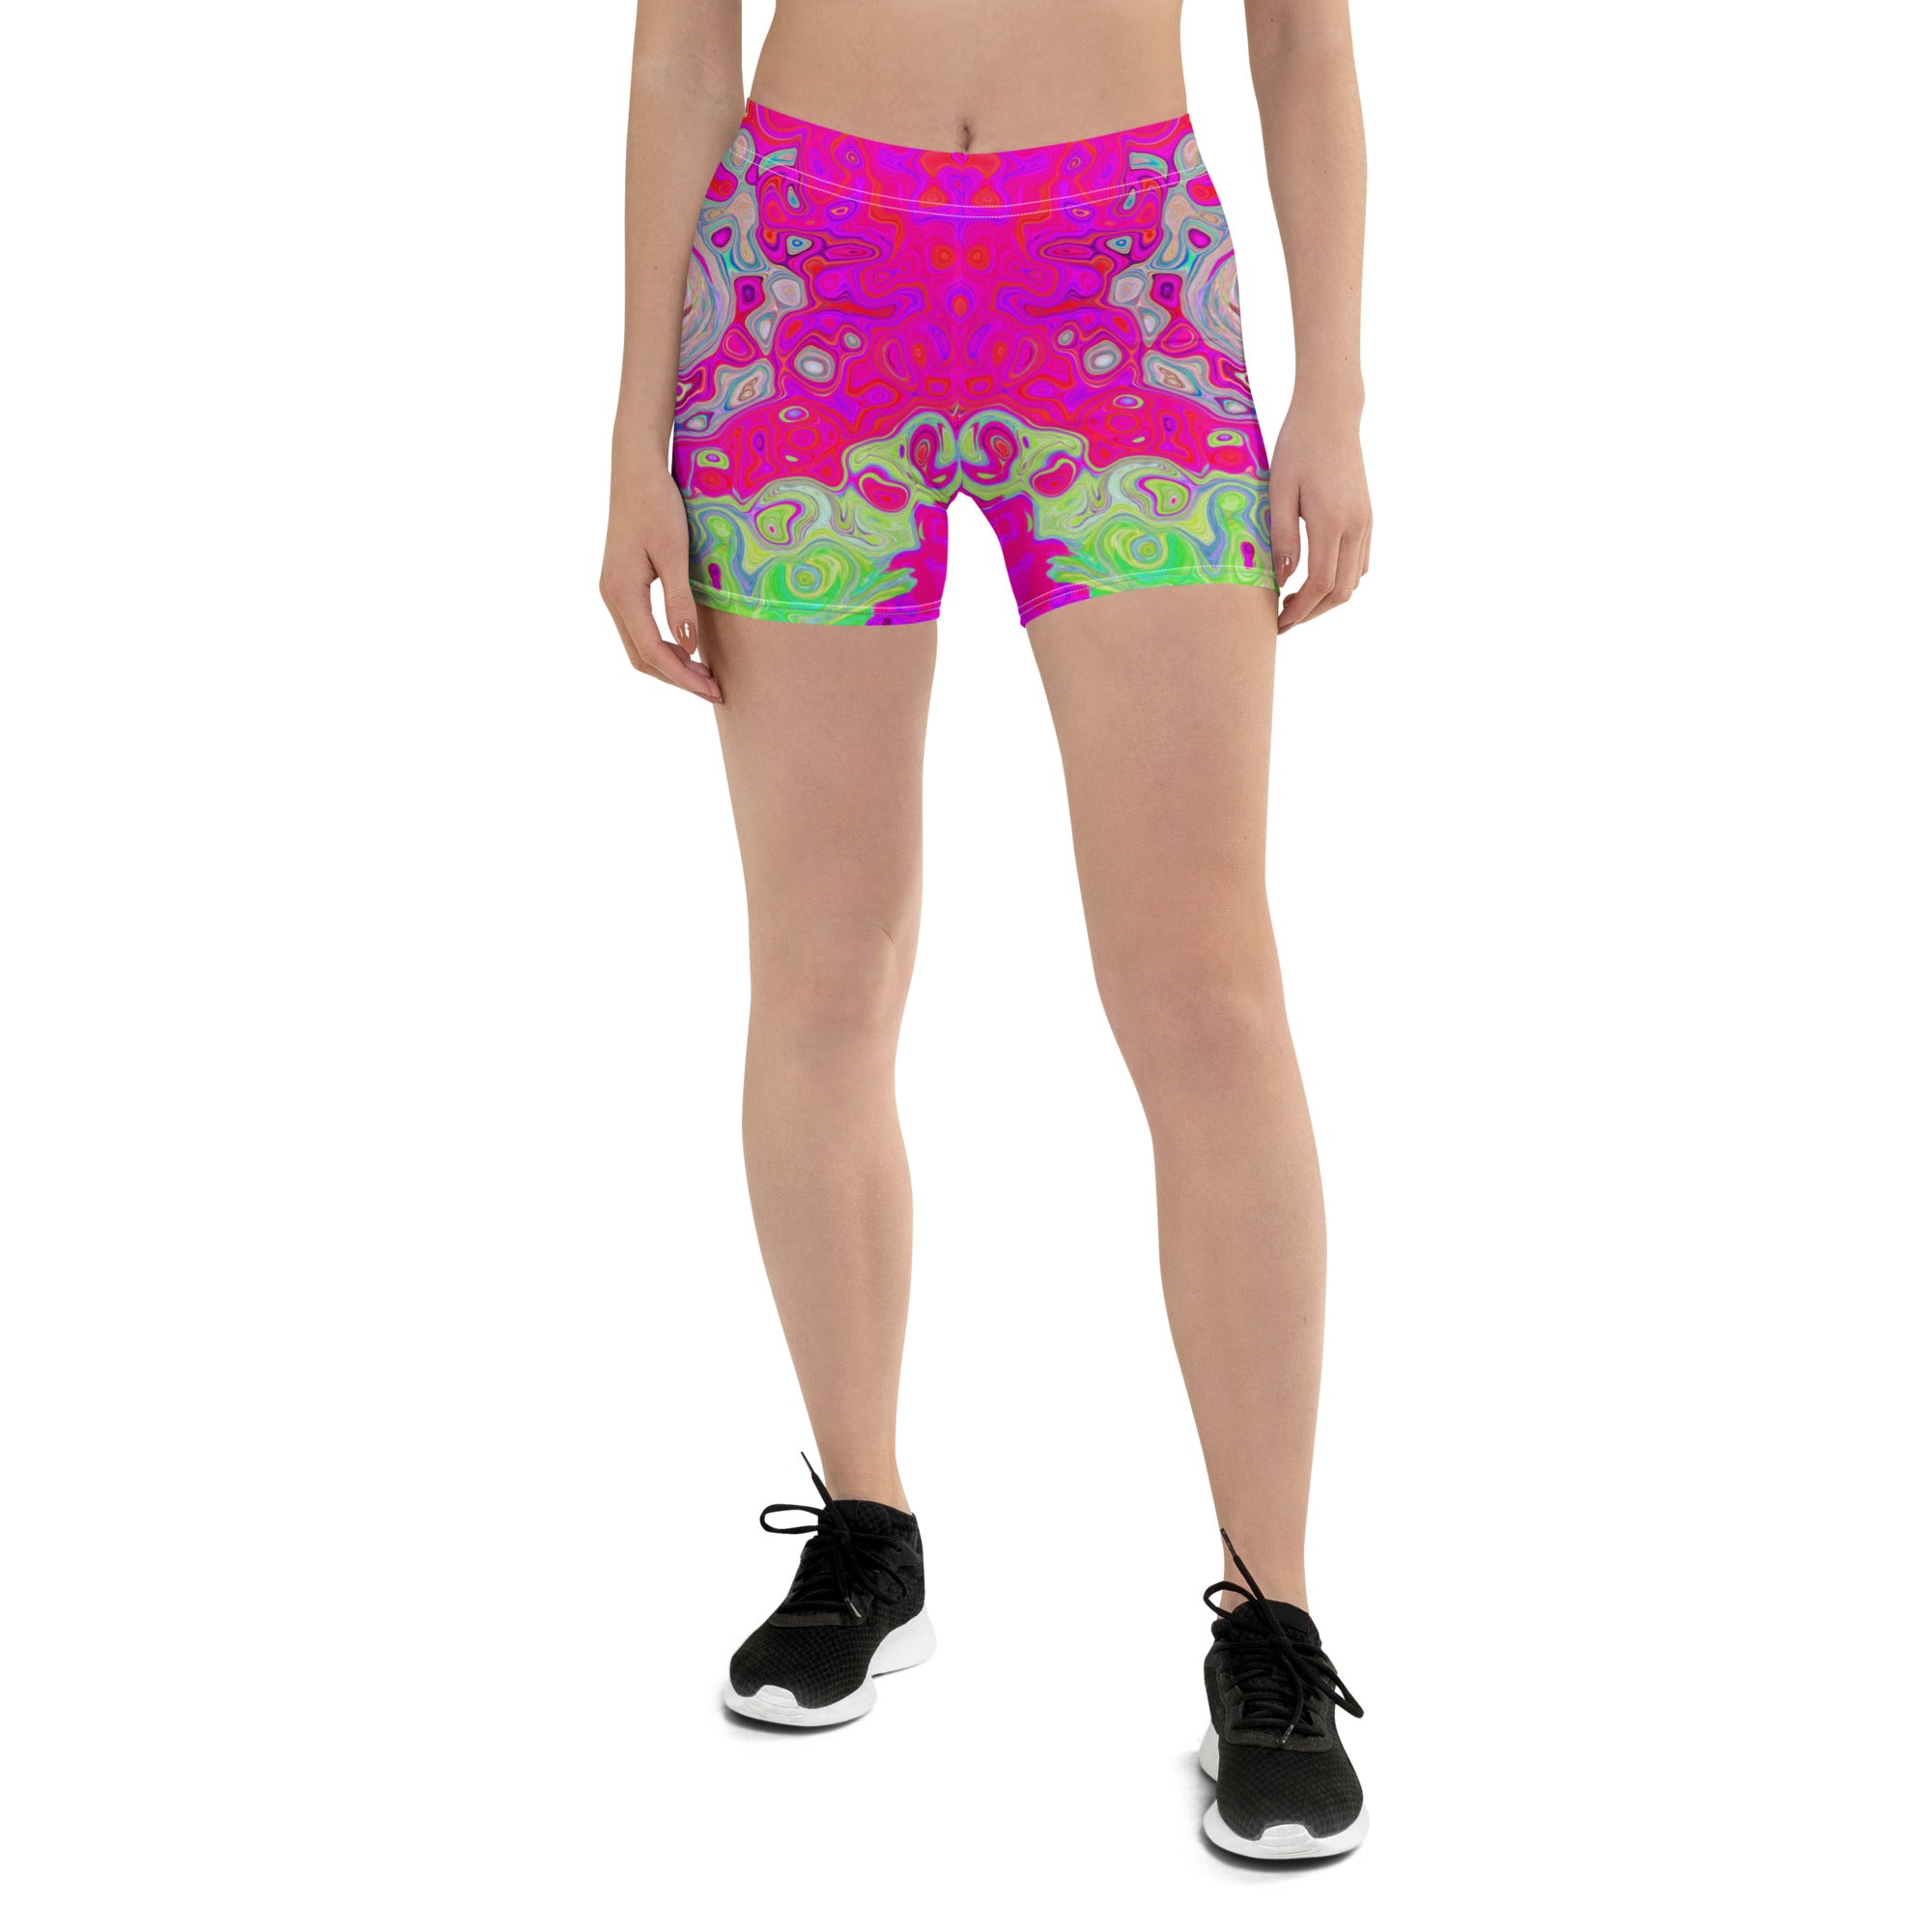 Spandex Shorts - Groovy Abstract Teal Blue and Red Swirl